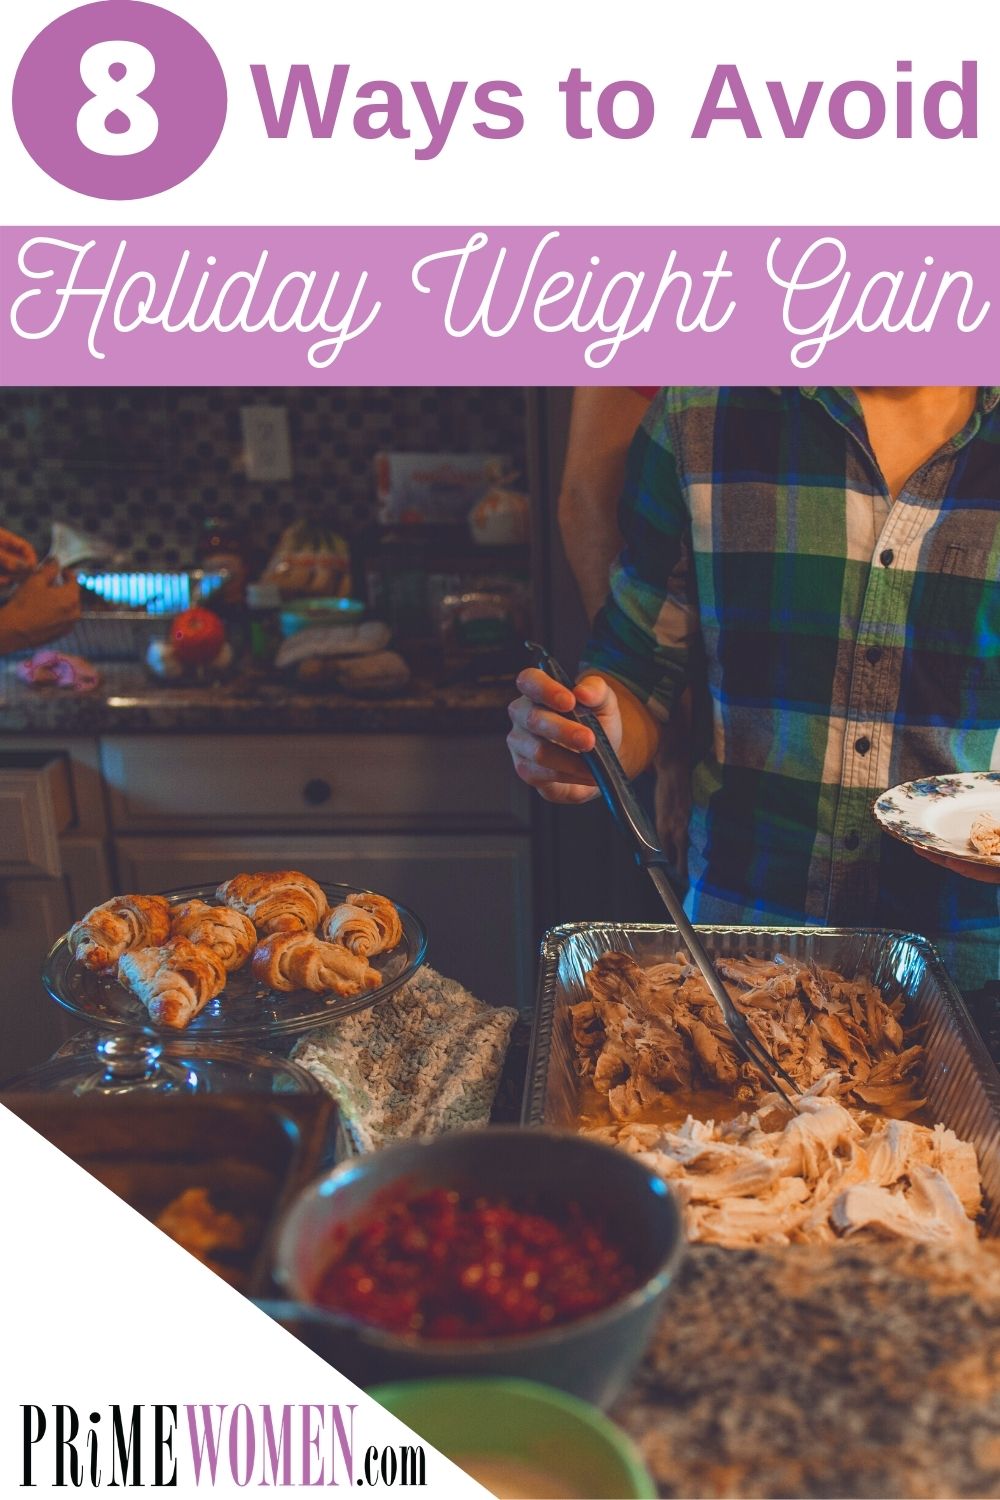 8 Ways to Avoid Holiday Weight Gain